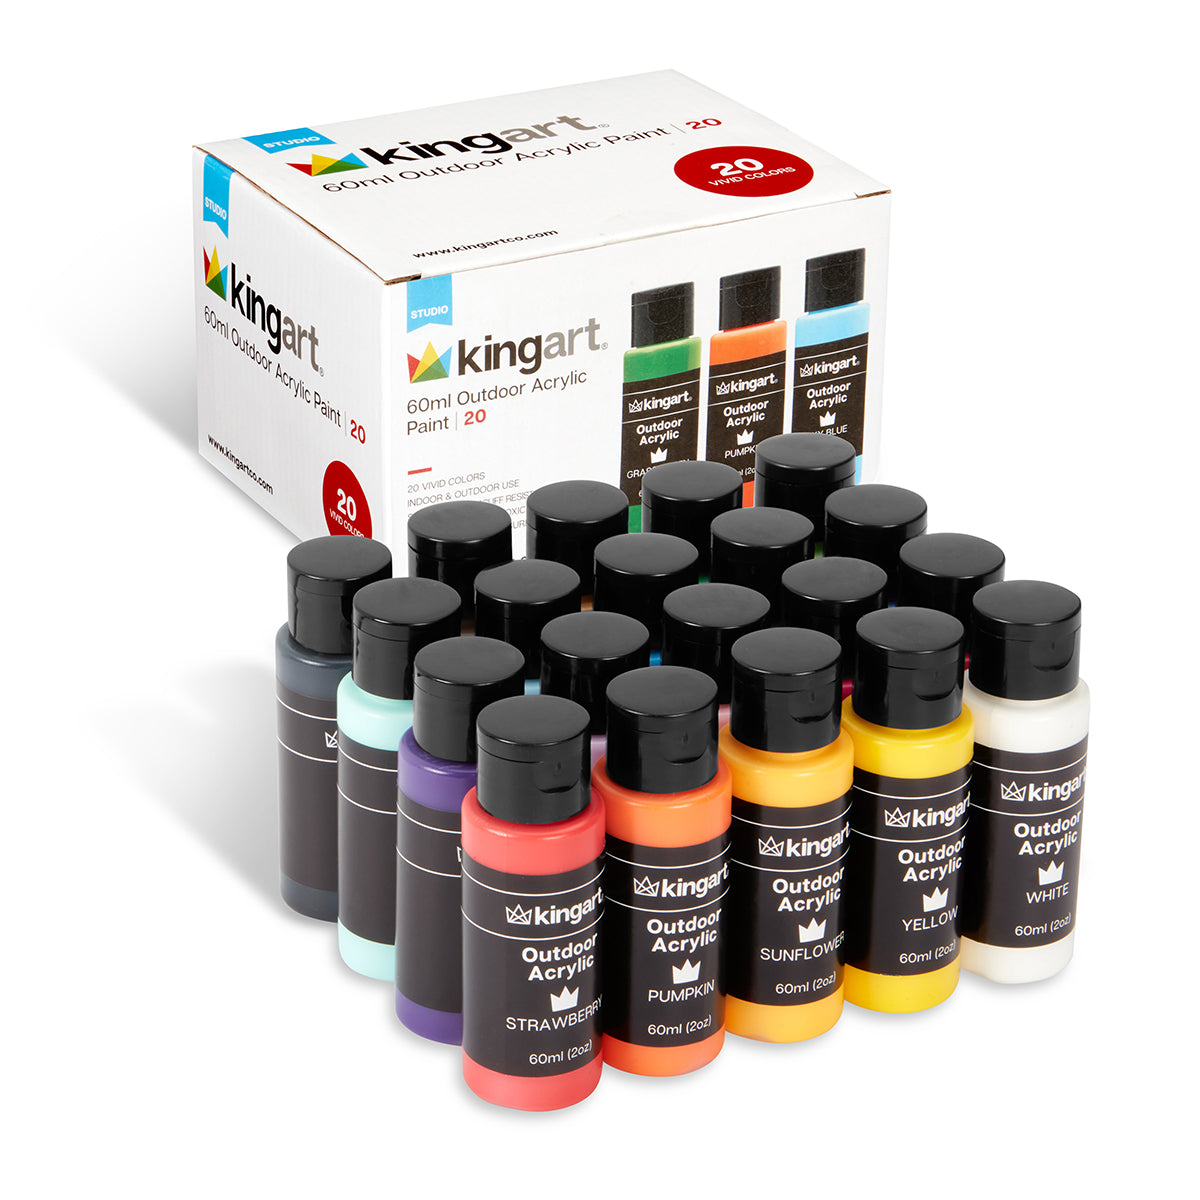 Metallic Acrylic Paint Set with 12 Brushes, Metallic Acrylic Paint Sets  with 20 Colors (60ml, 2oz), Acrylic Paint Set for Artists, Beginners on  Rocks